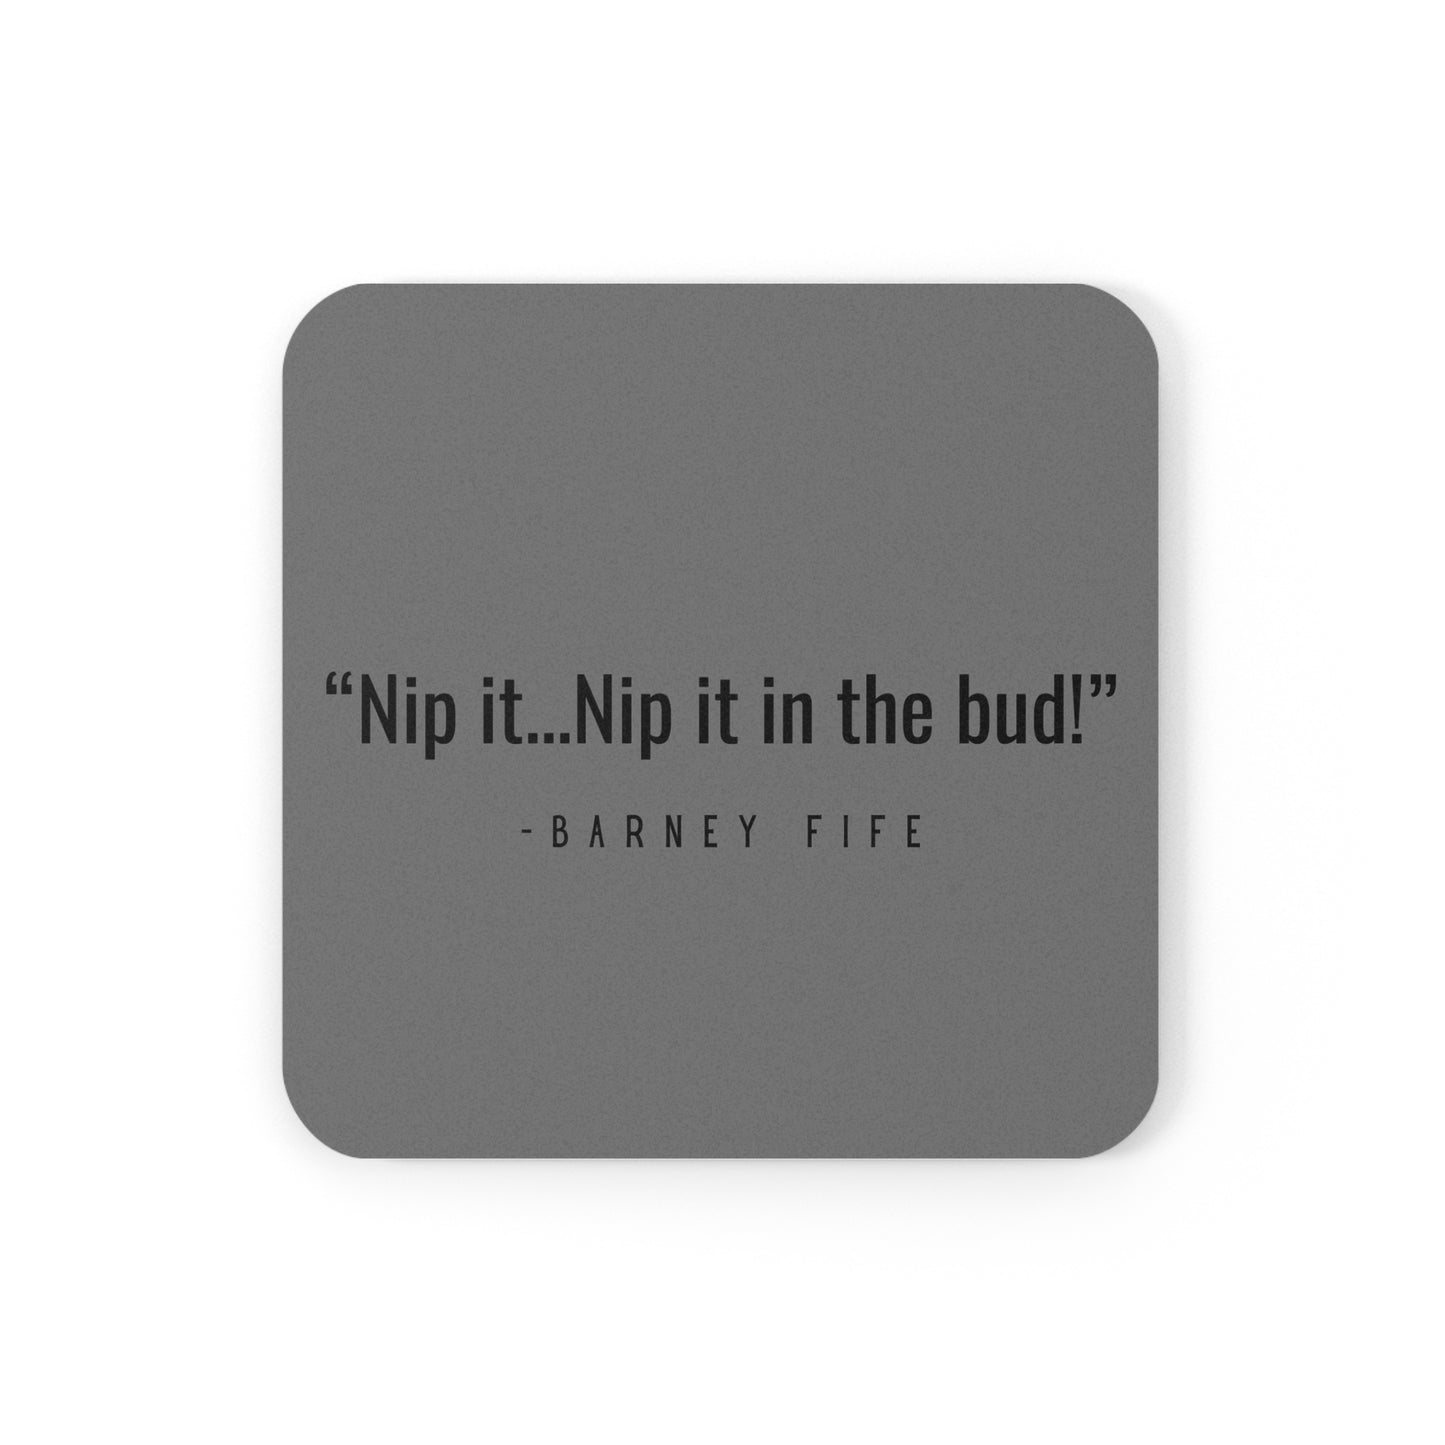 Andy Griffith Show Inspired/Funny/Quote/Barney/Cork Back Coaster"Nip it...Nip it in the bud!-Barney Fife"